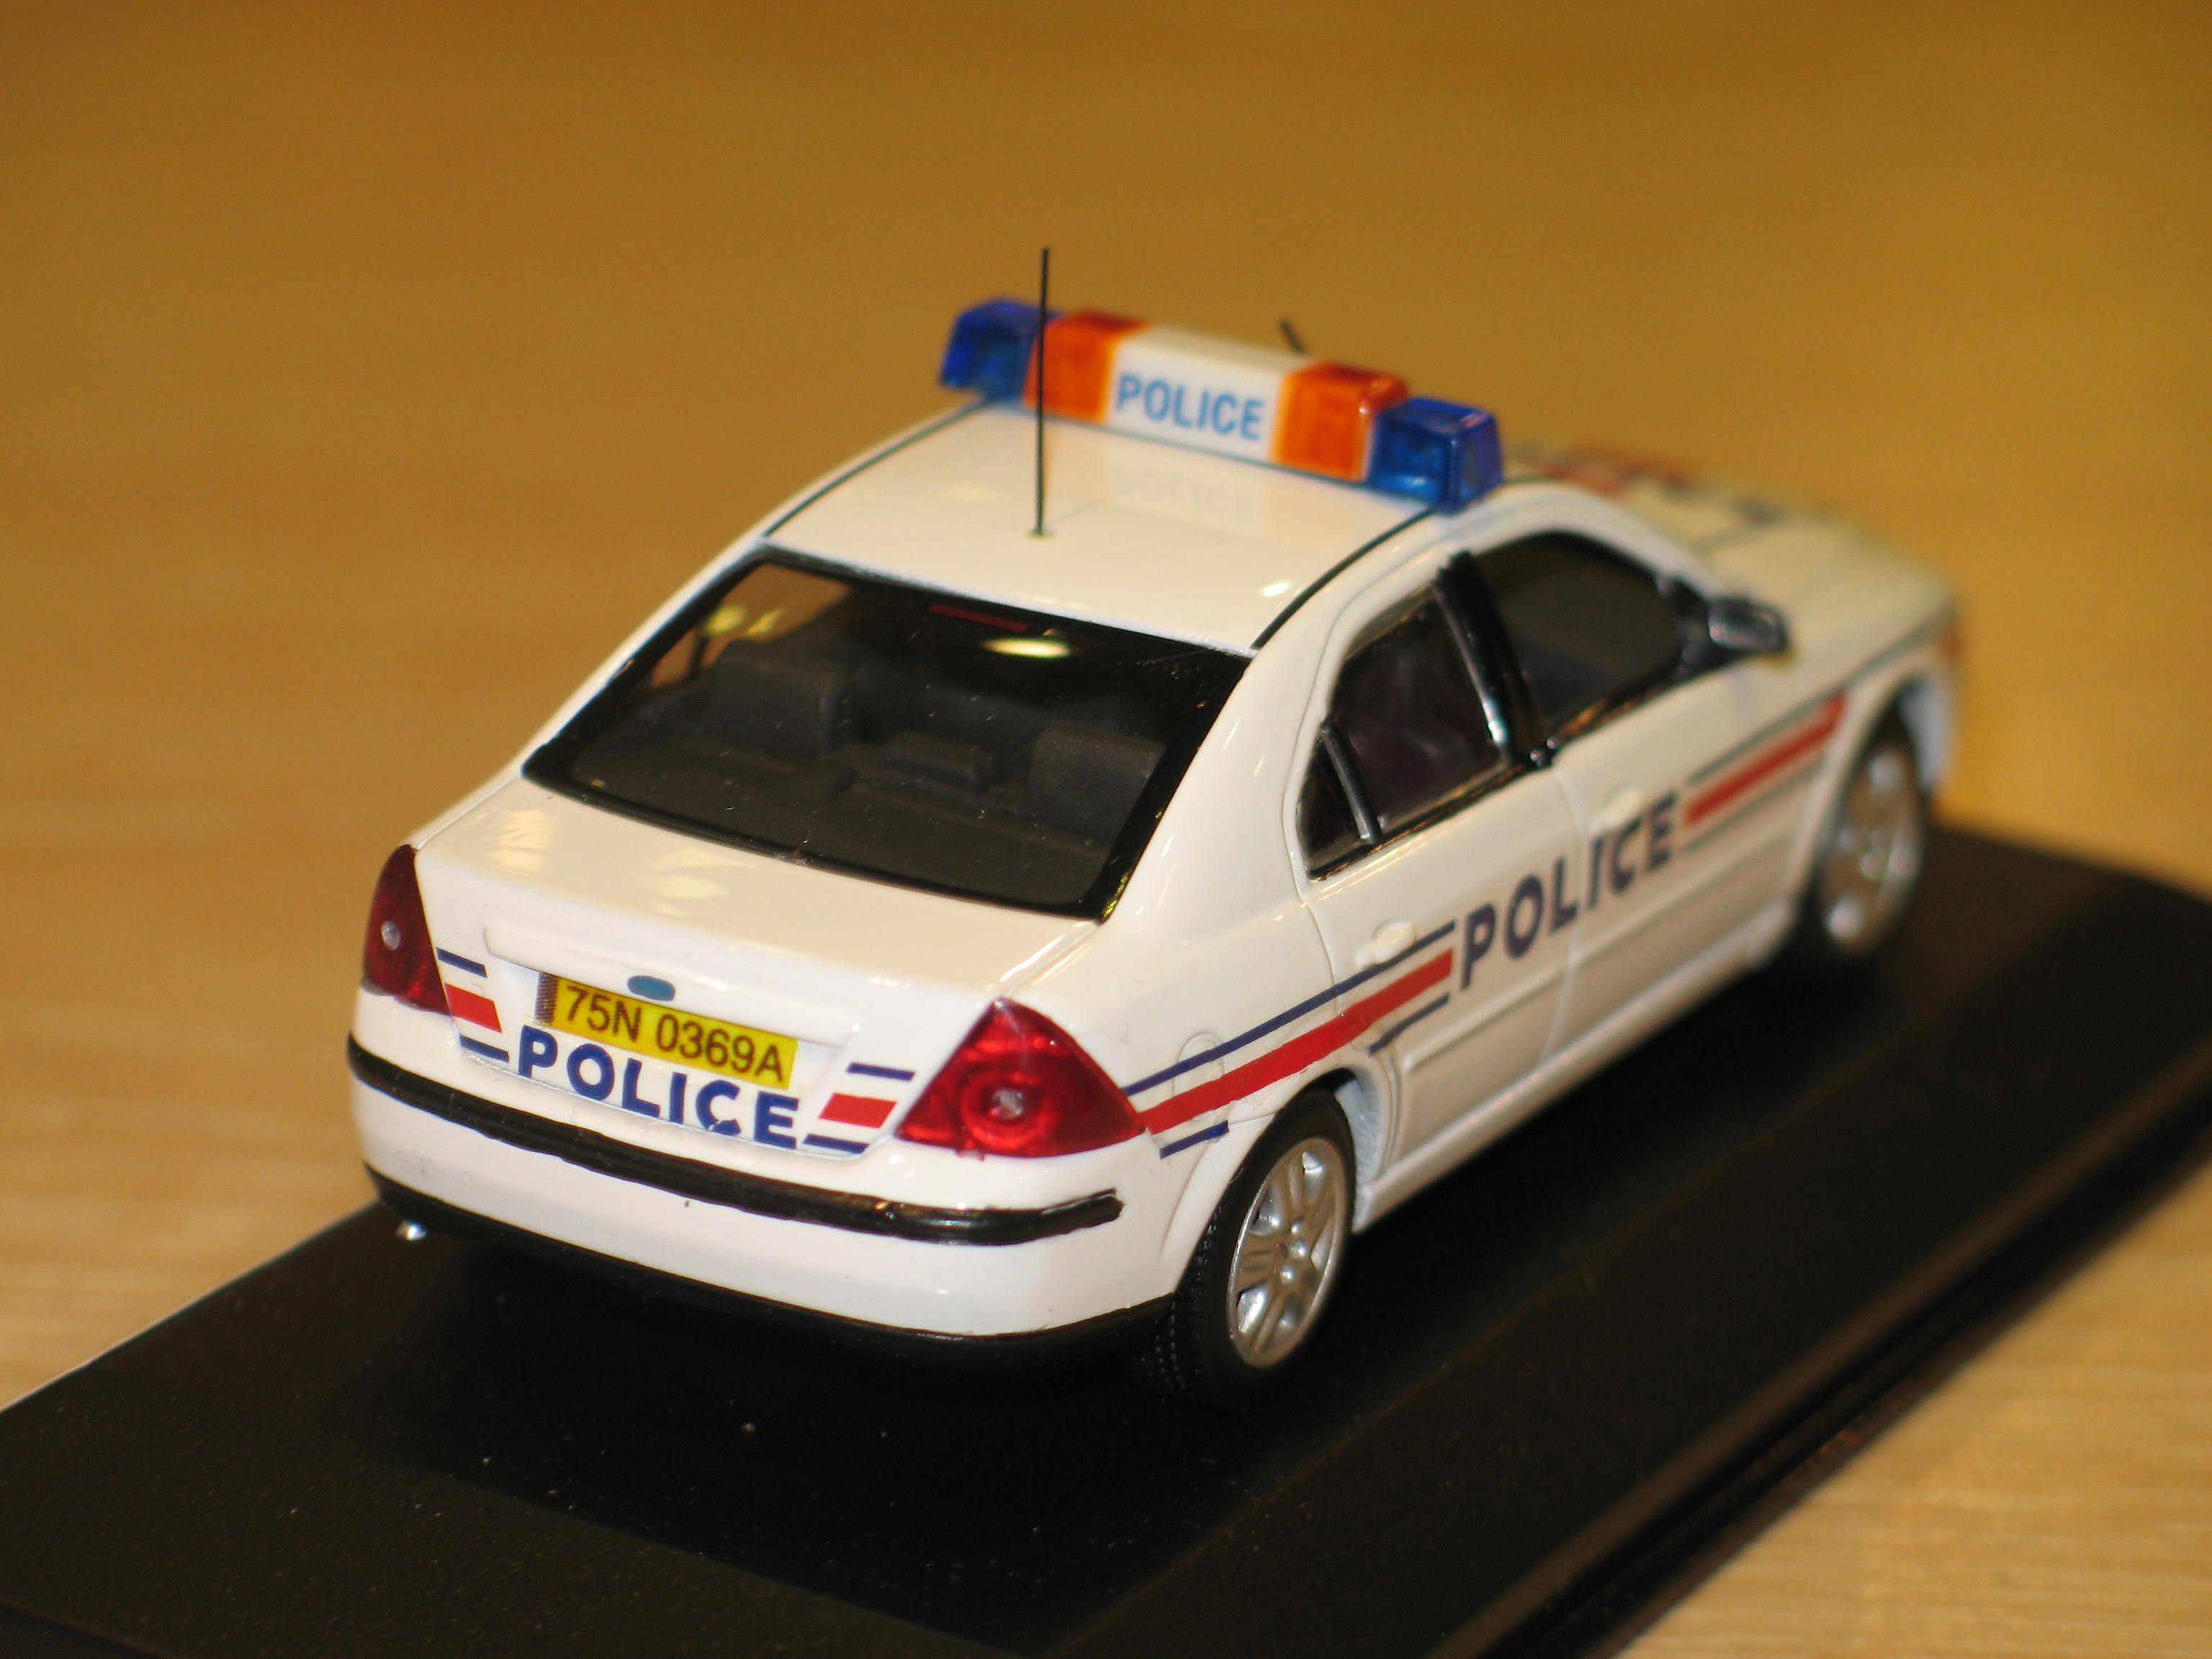 FORD MONDEO POLICE 2004 LABEL43 1/43°